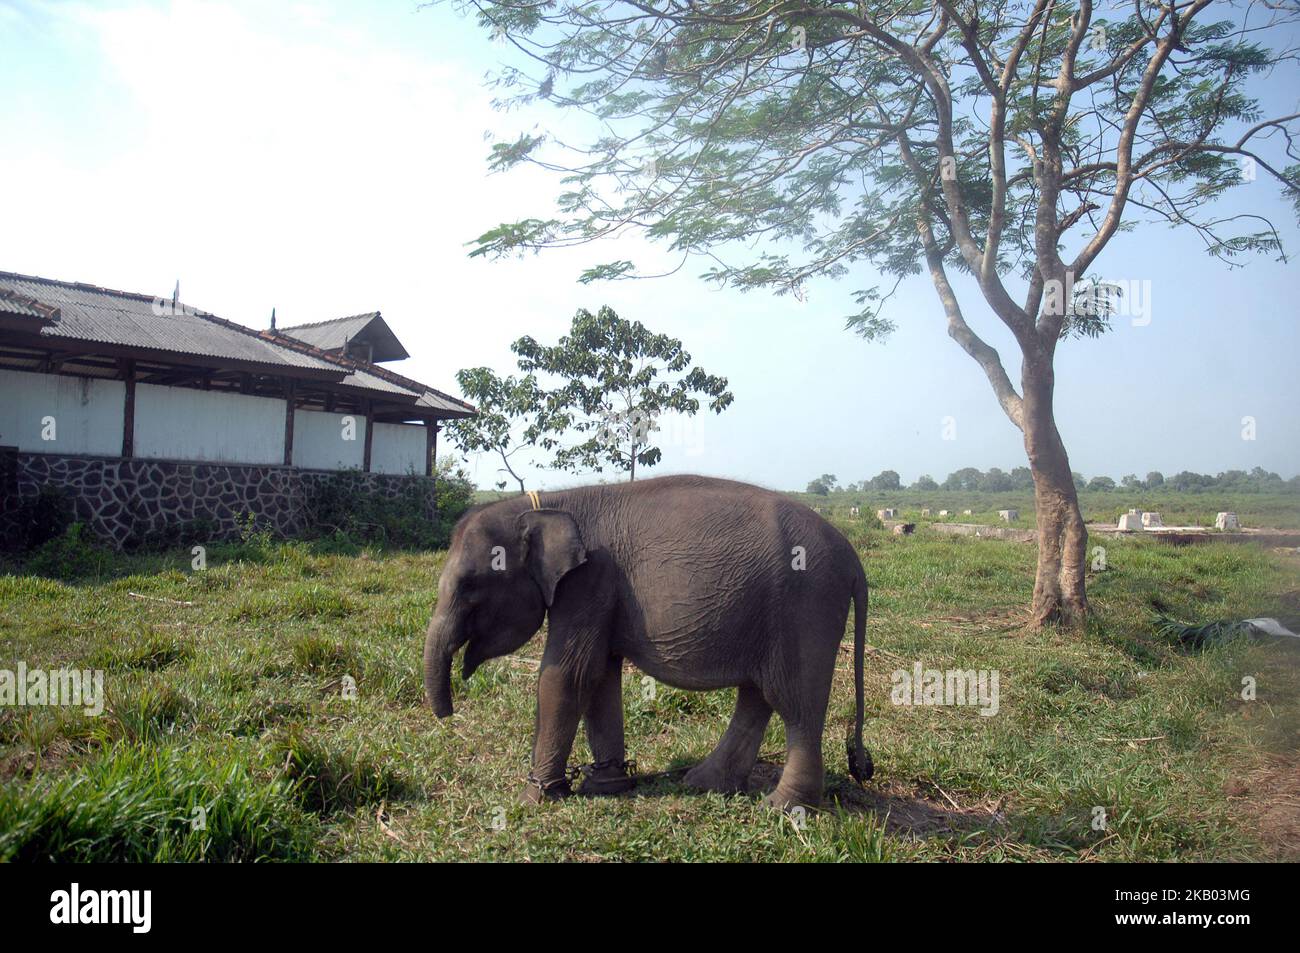 Erin four-year-old Sumatran elephant learned to live with a short trunk in Way Kambas National Park, Lampung, Indonesia on July 16, 2018. The Sumatran elephant Erin was discovered in July 2016 when he was two years old near a residential settlement in the Susukan Baru area of Lampung province, within Way Kambas National Park. She is weak, thin and has pinworms in her intestines. The short trunk creates an obstacle in reaching food, pushing, and drinking and the handler must give extra care for Erin. (Photo by Dasril Roszandi/NurPhoto) Stock Photo